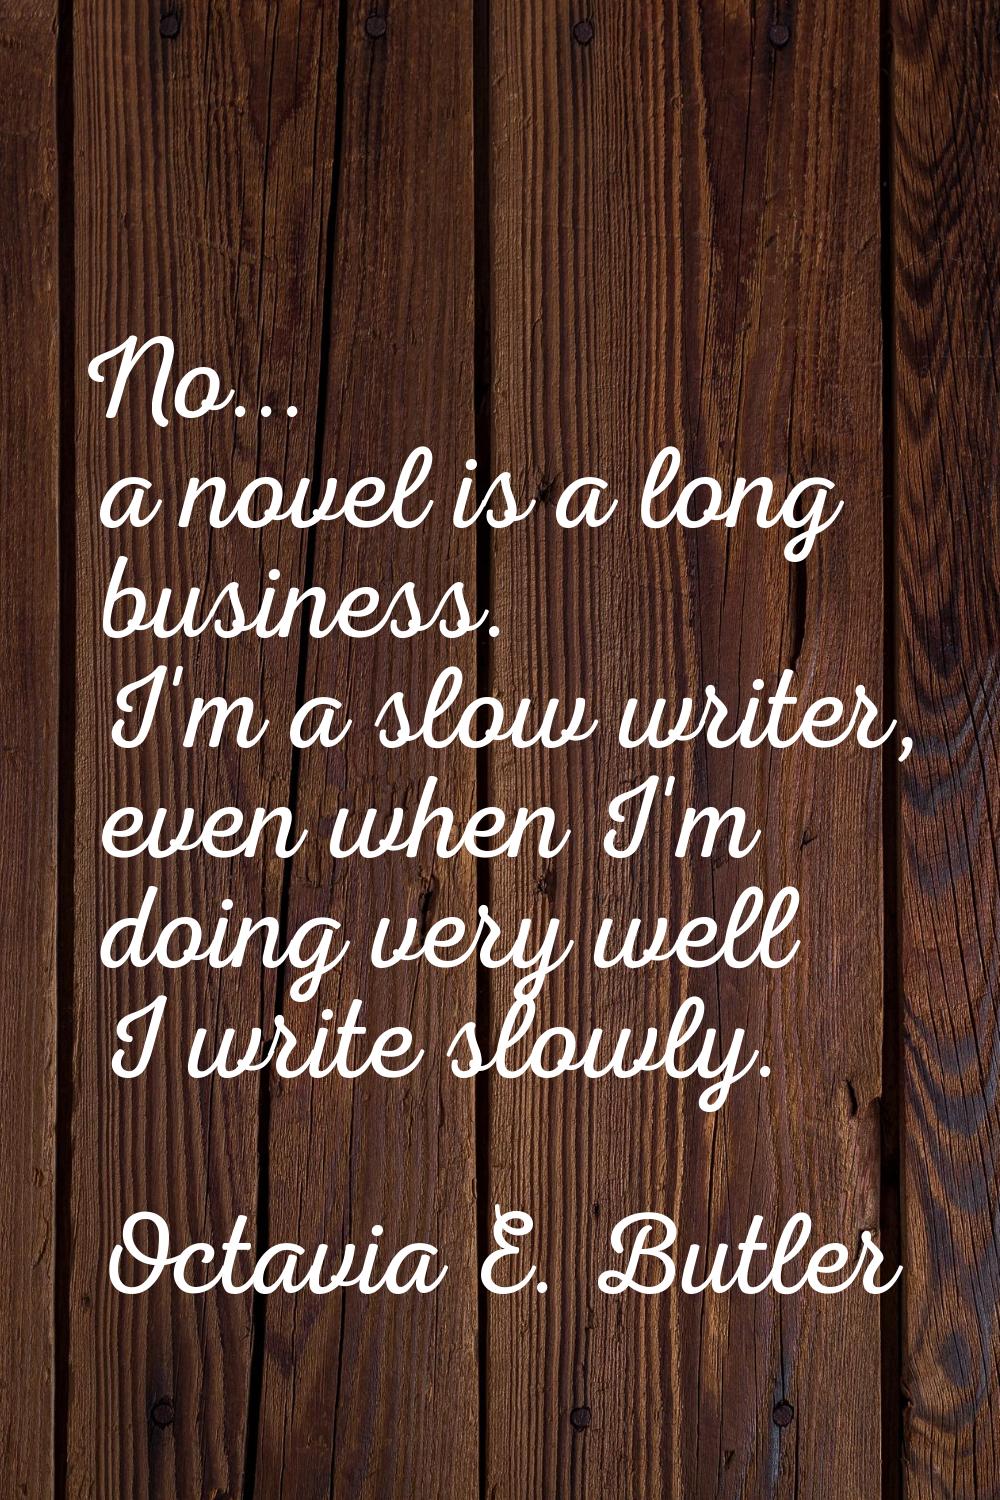 No... a novel is a long business. I'm a slow writer, even when I'm doing very well I write slowly.